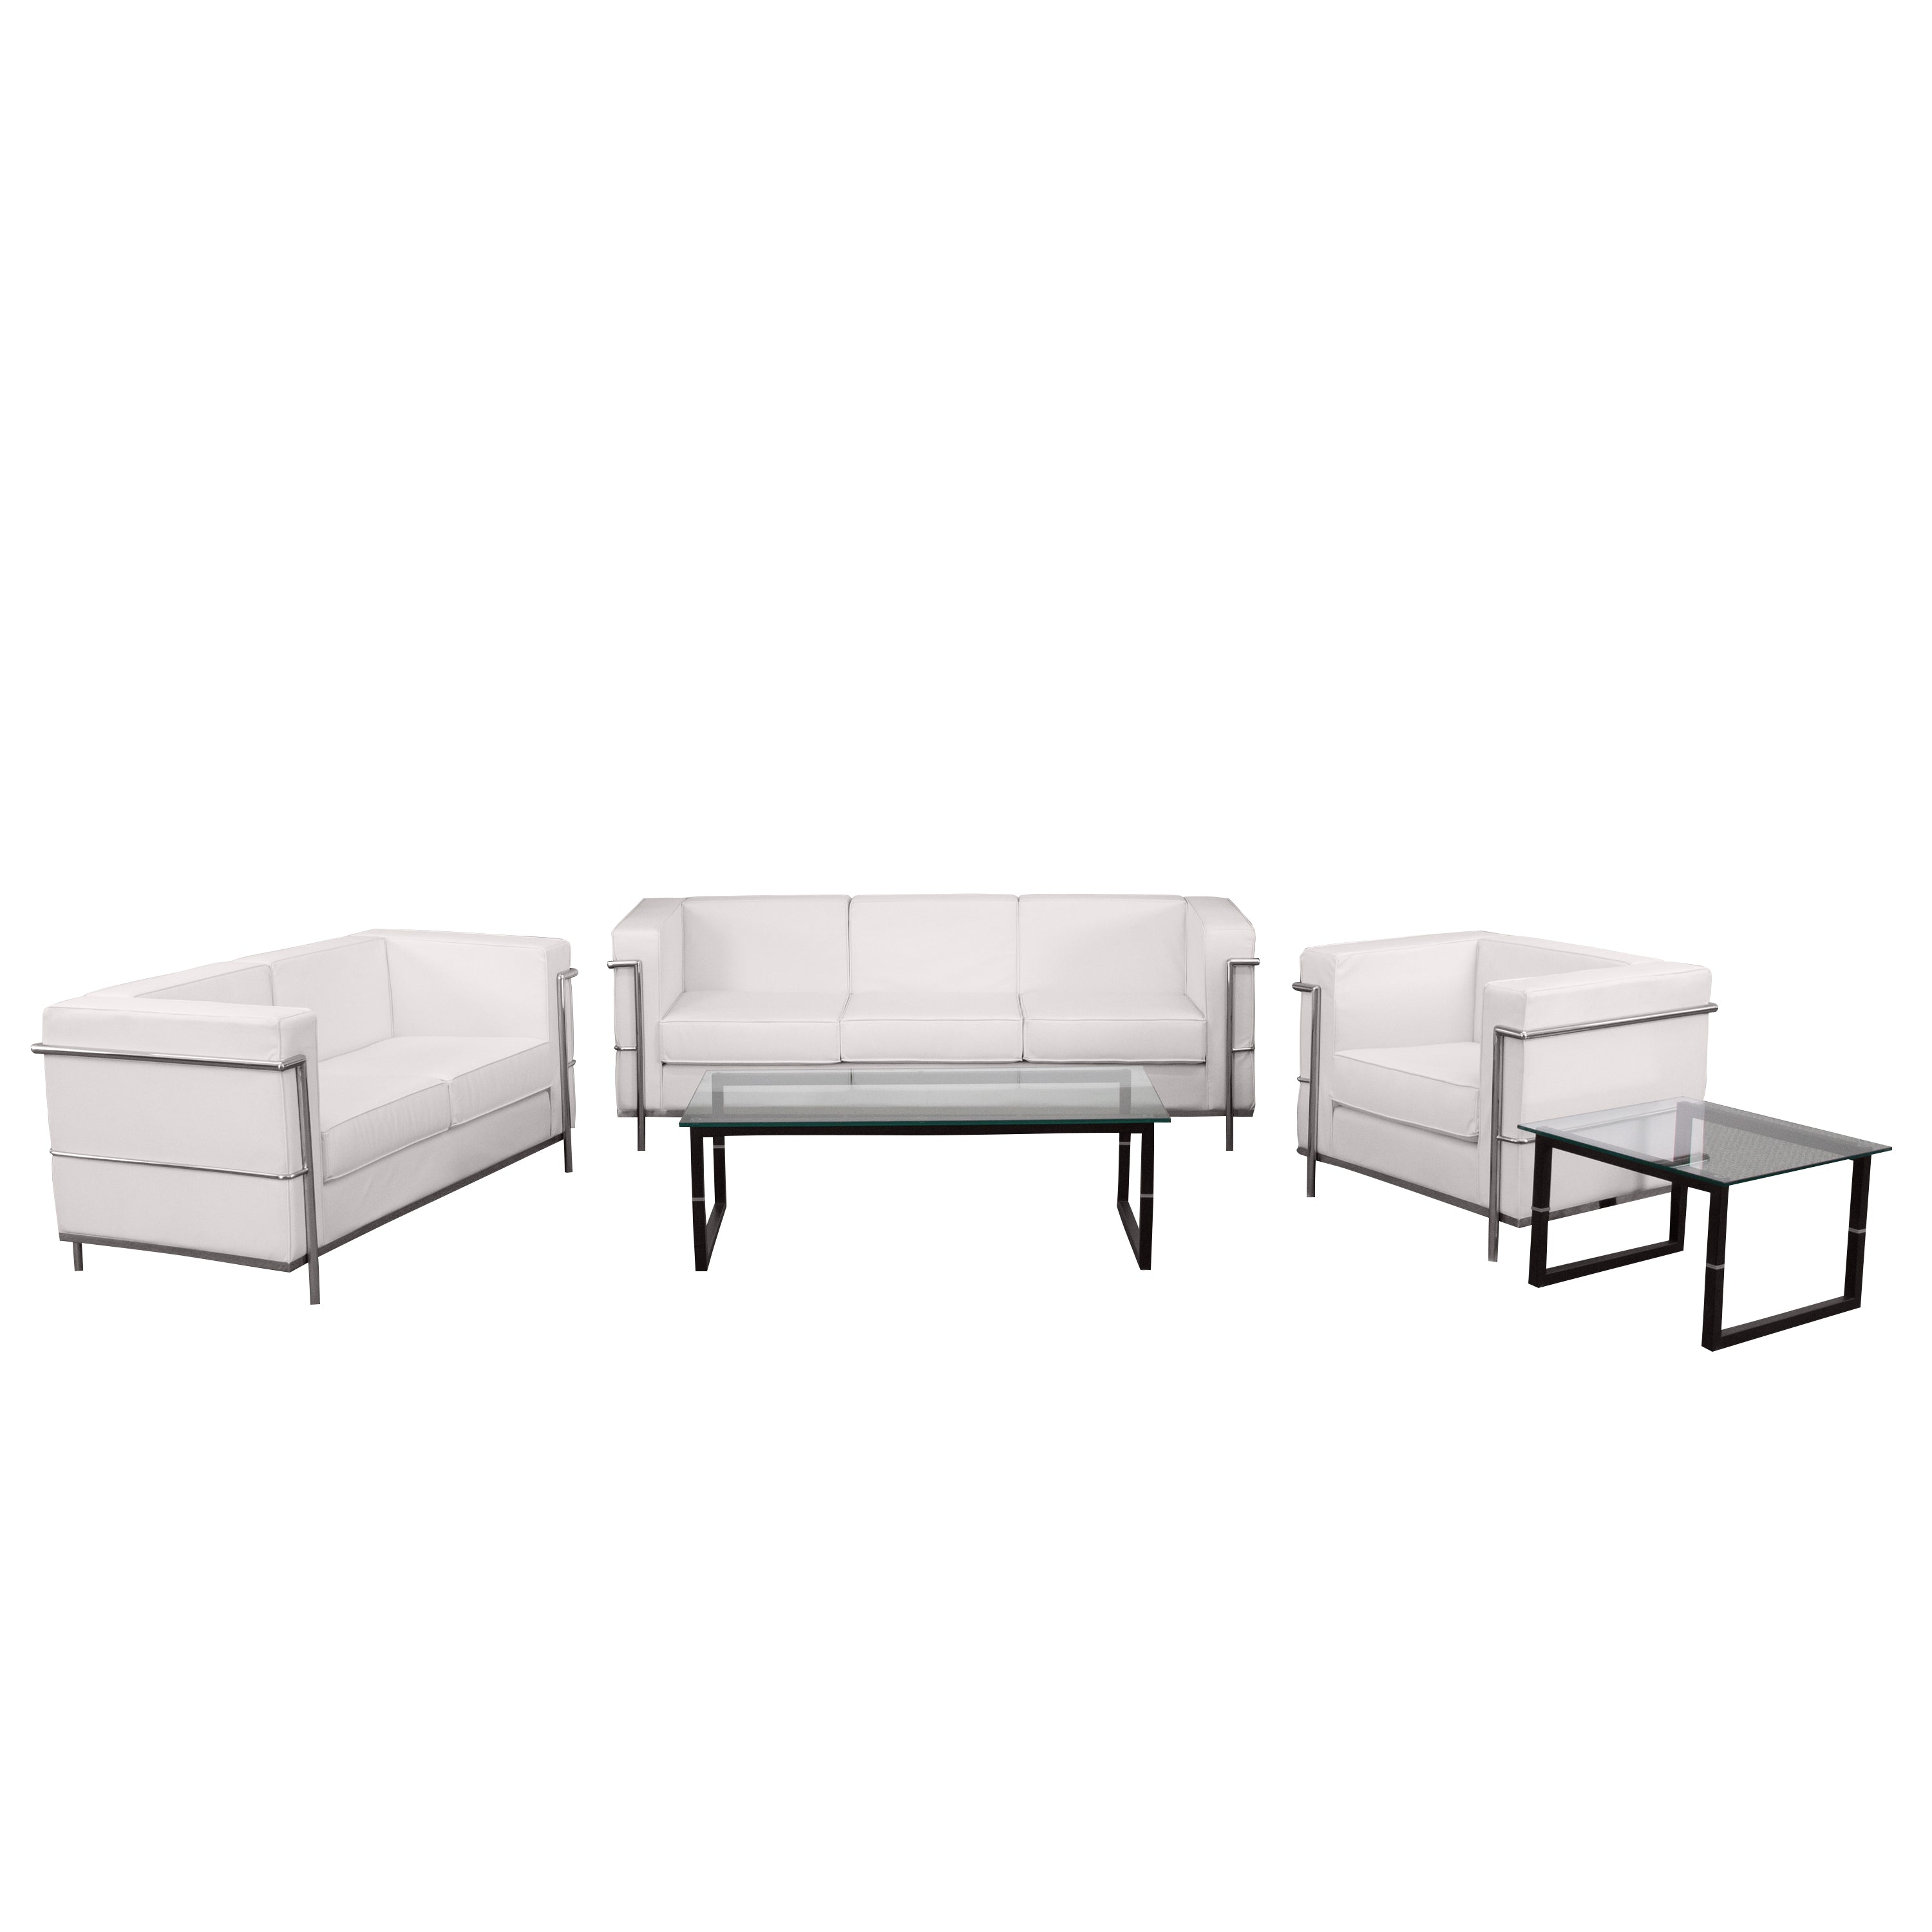 HERCULES Regal Series Reception Set in LeatherSoft with <span style="color:#0000CD;">Free </span> Tables-Reception Set-Flash Furniture-Wall2Wall Furnishings